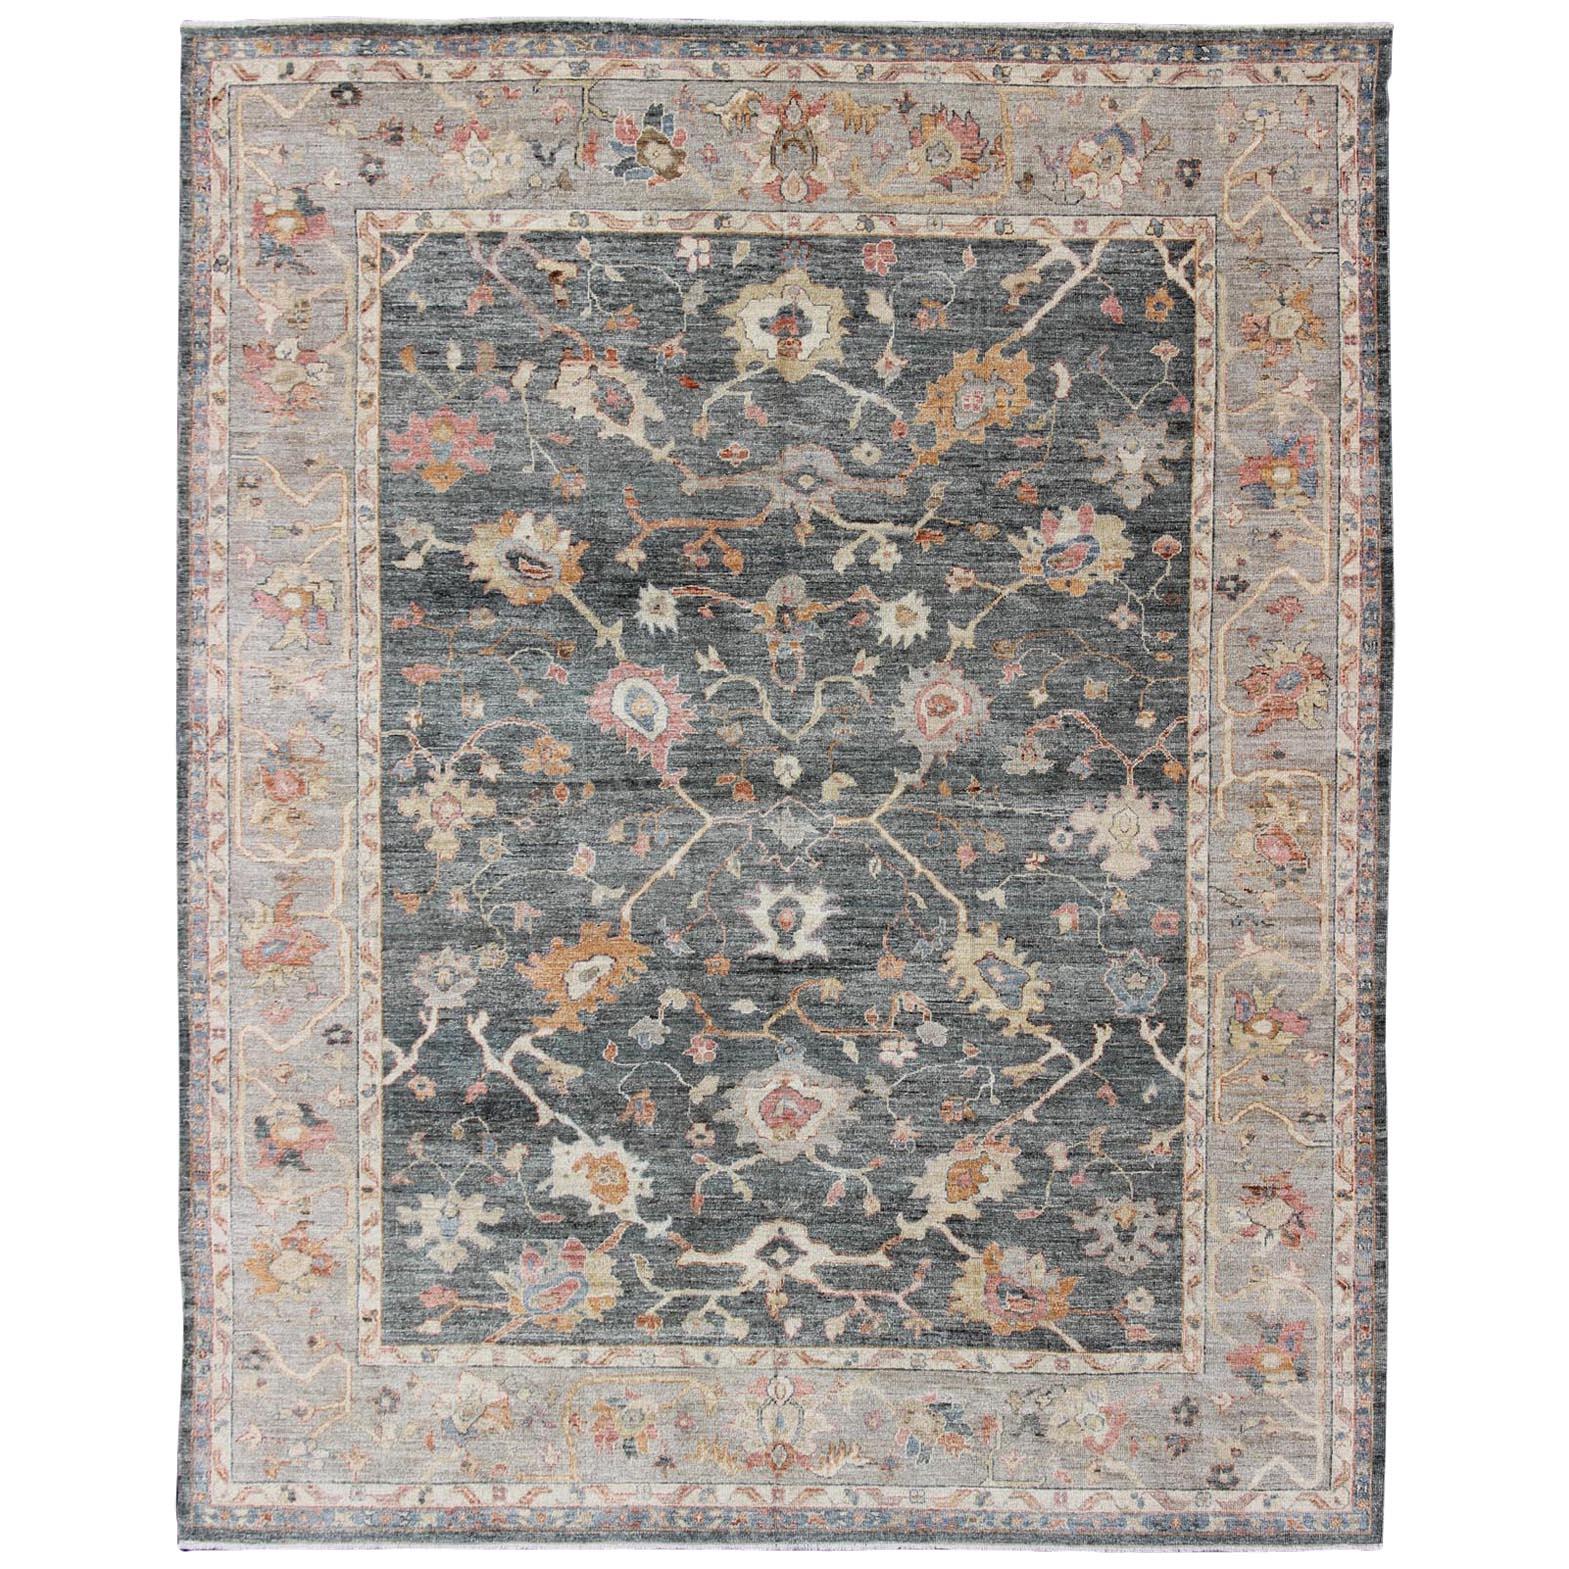 Angora Turkish Oushak Rug in Dark Green, Silver Gray, Orange, and hints of Pink. For Sale